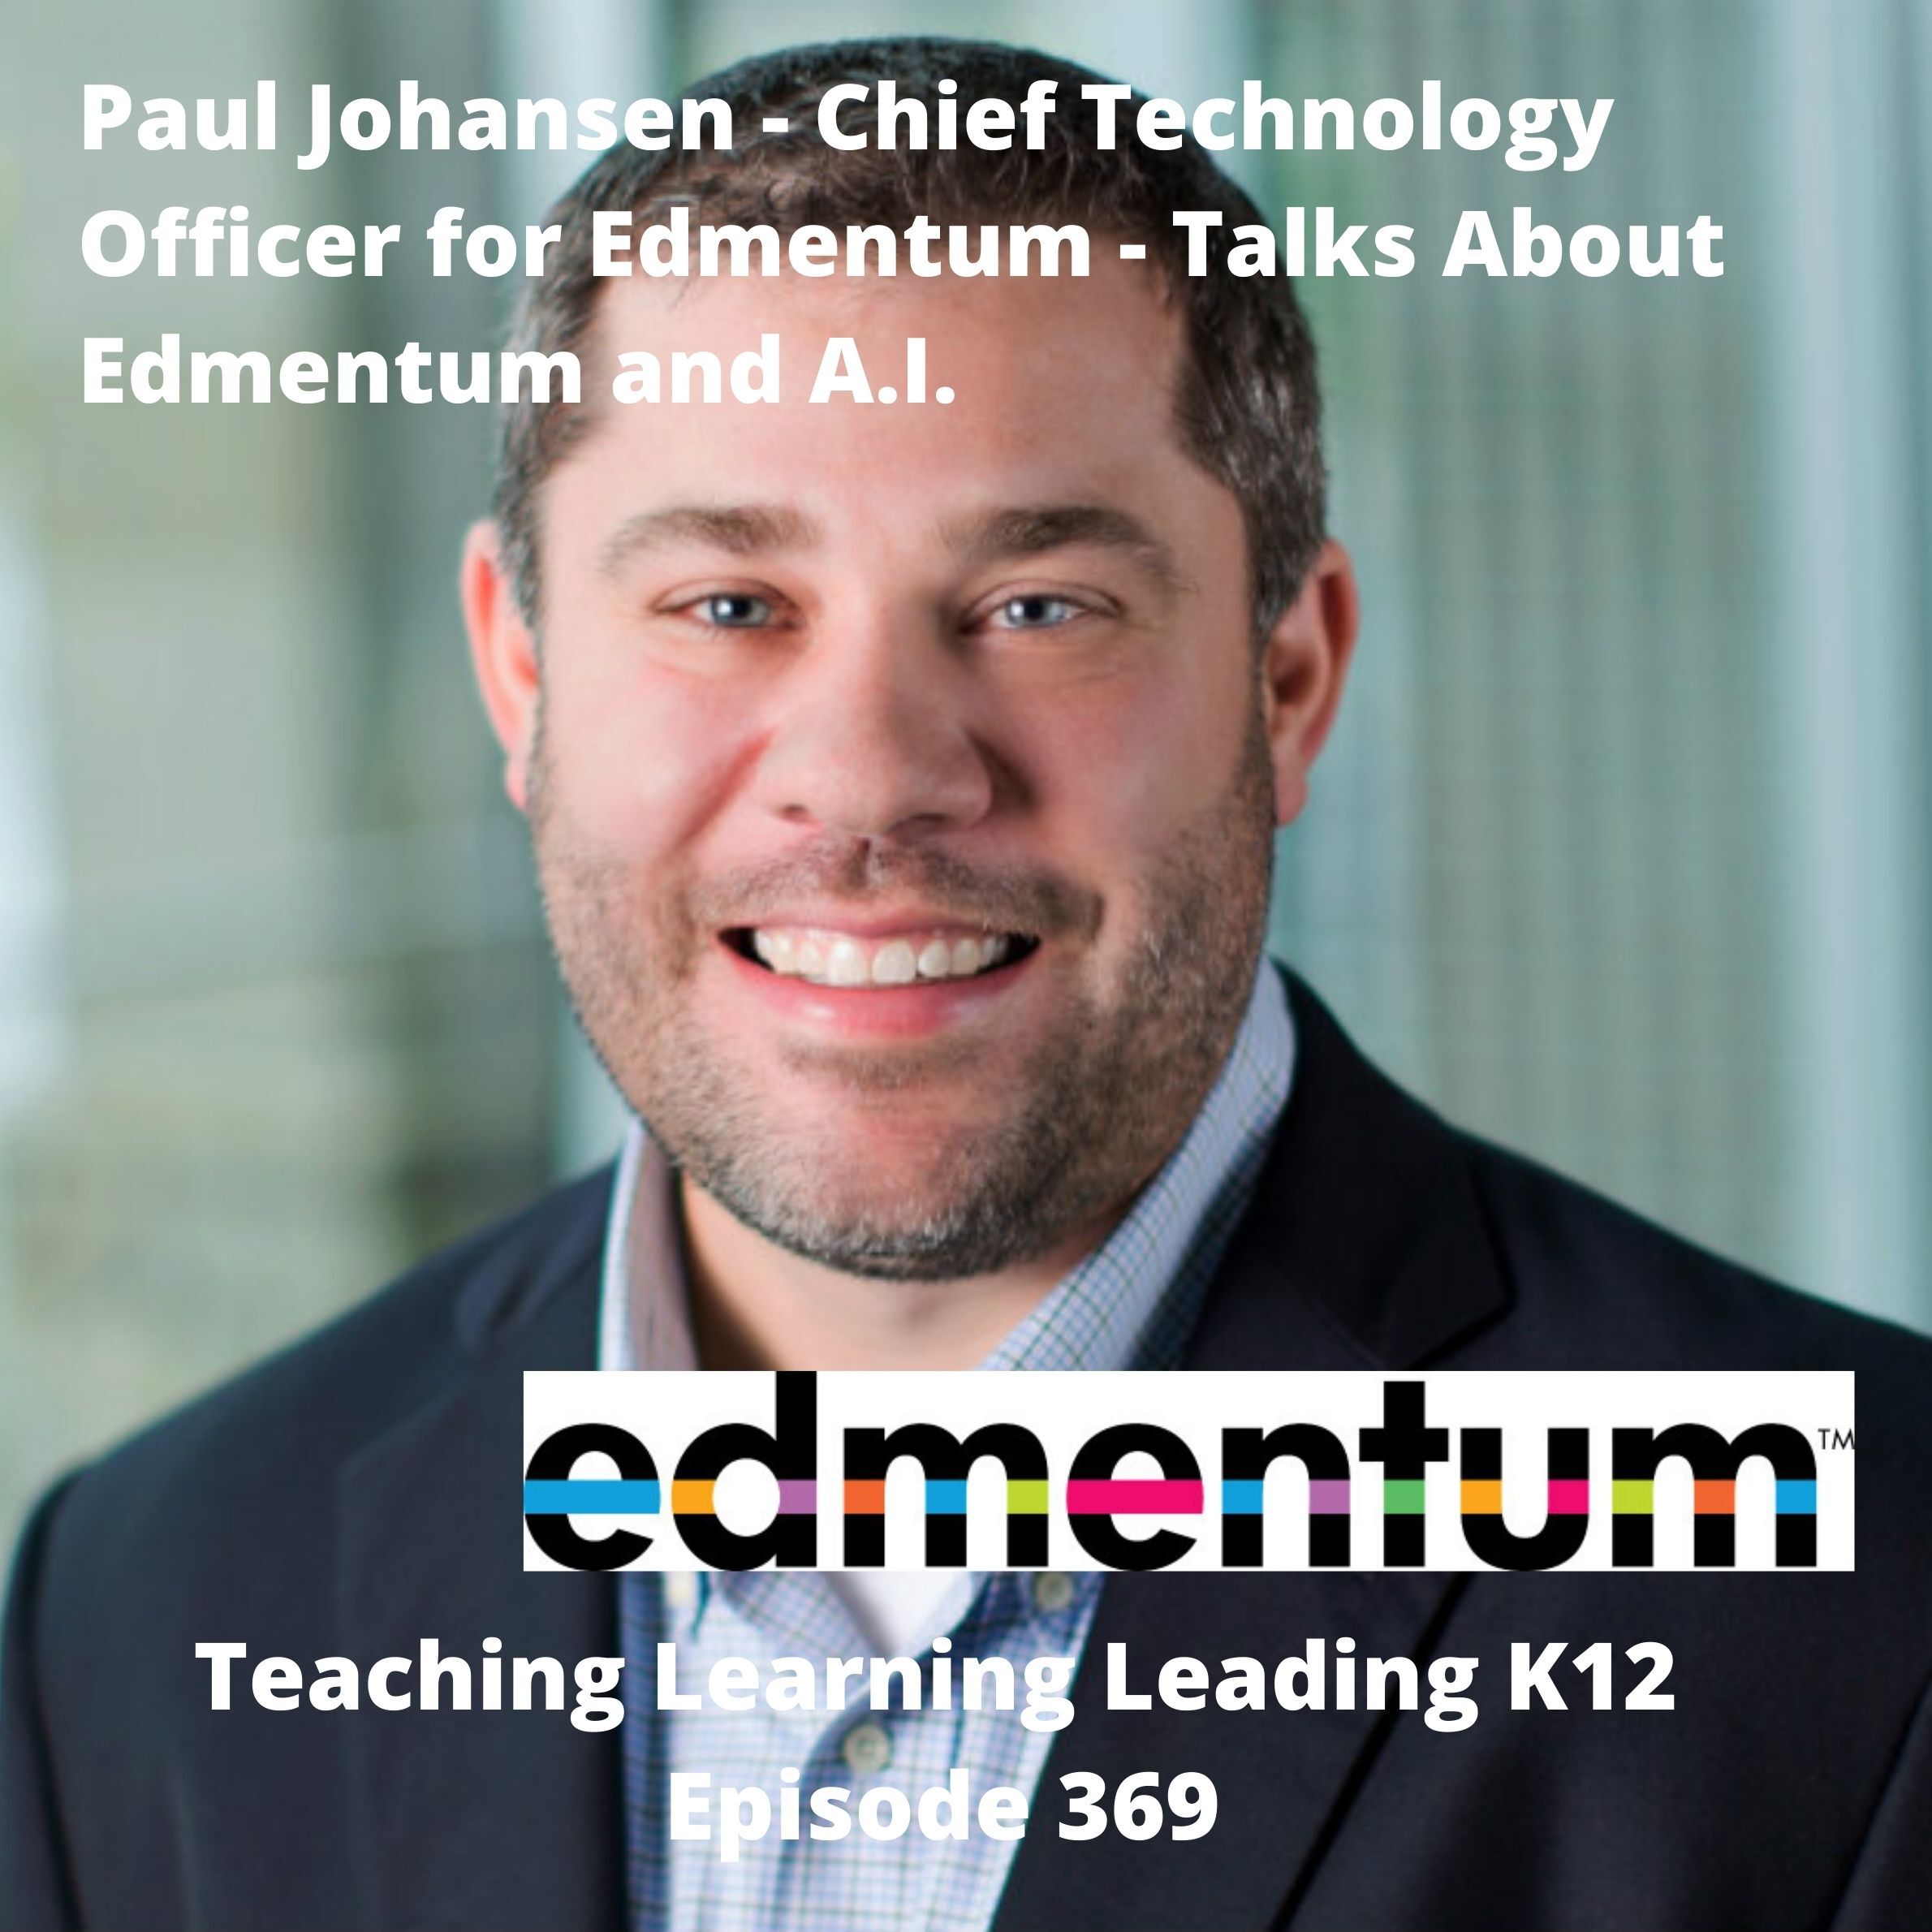 Paul Johansen - Chief Technology Officer for Edmentum - talks about Edmentum and A.I. - 369 Image